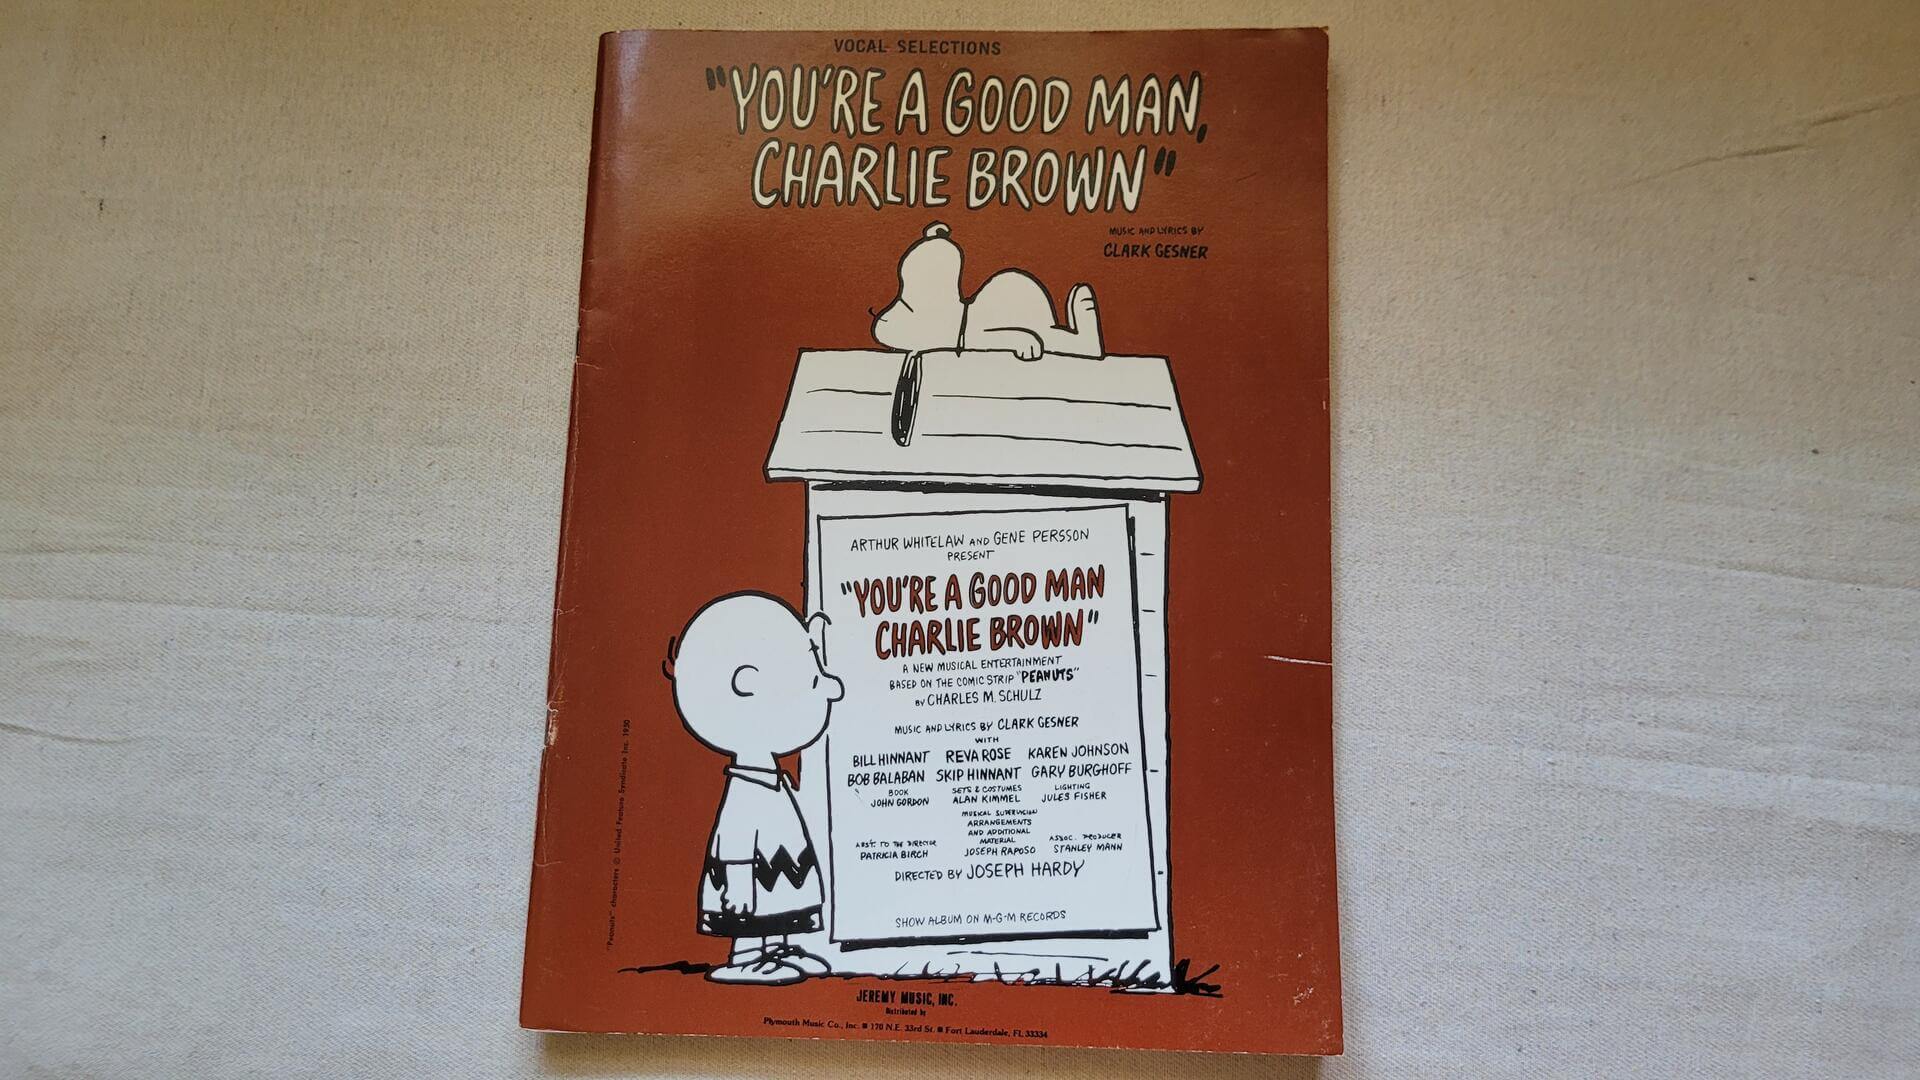 you-re-good-man-charlie-brown-1967-music-book-by-whitelaw-persson-vocal-selections-sheet-music-nased-on-peanuts-comic-book-by-charles-schulz-cover-page